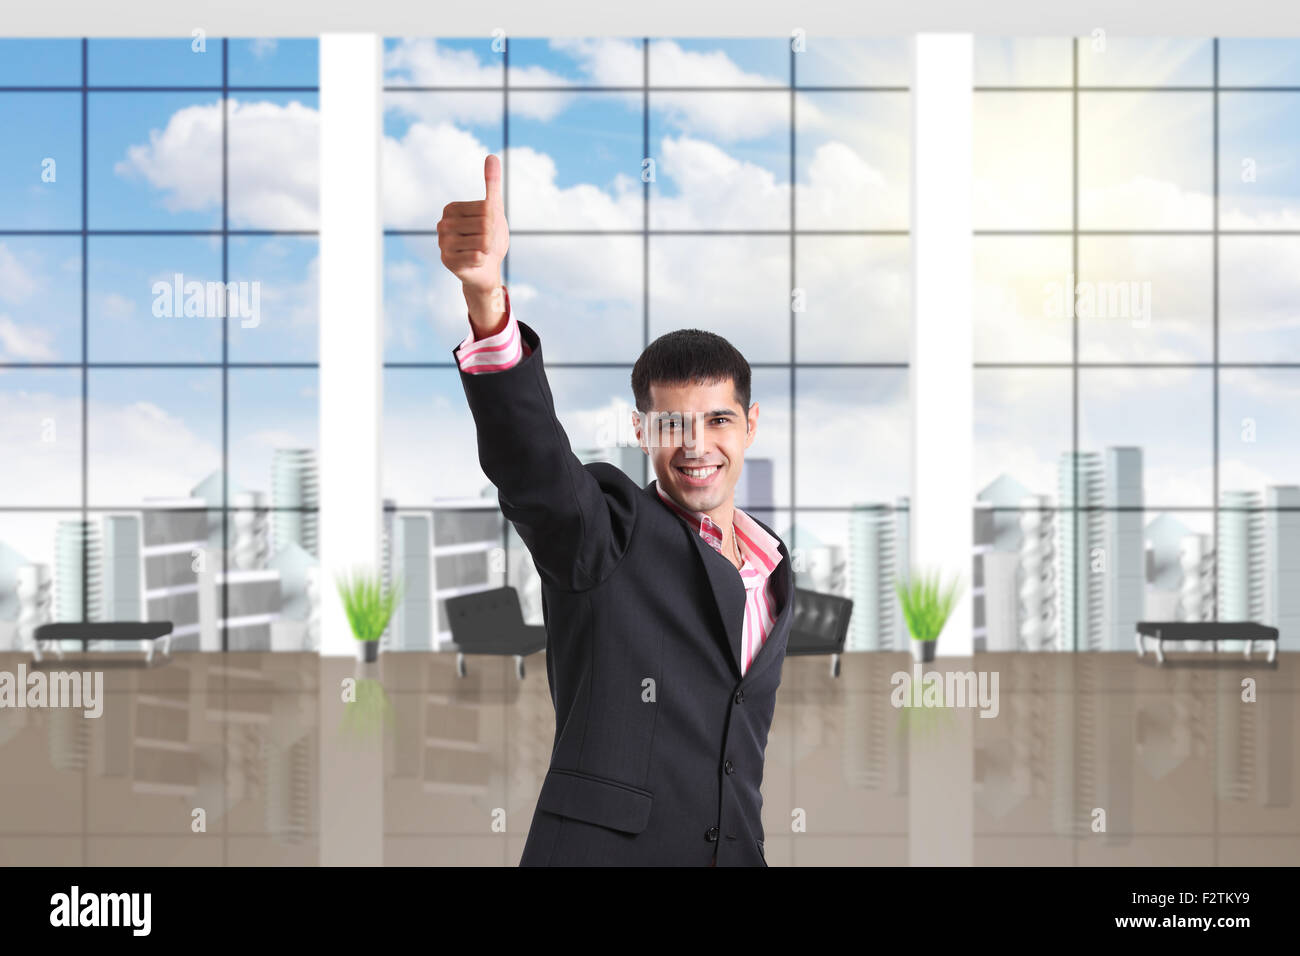 Happy businessman shows thumbs up sign Stock Photo